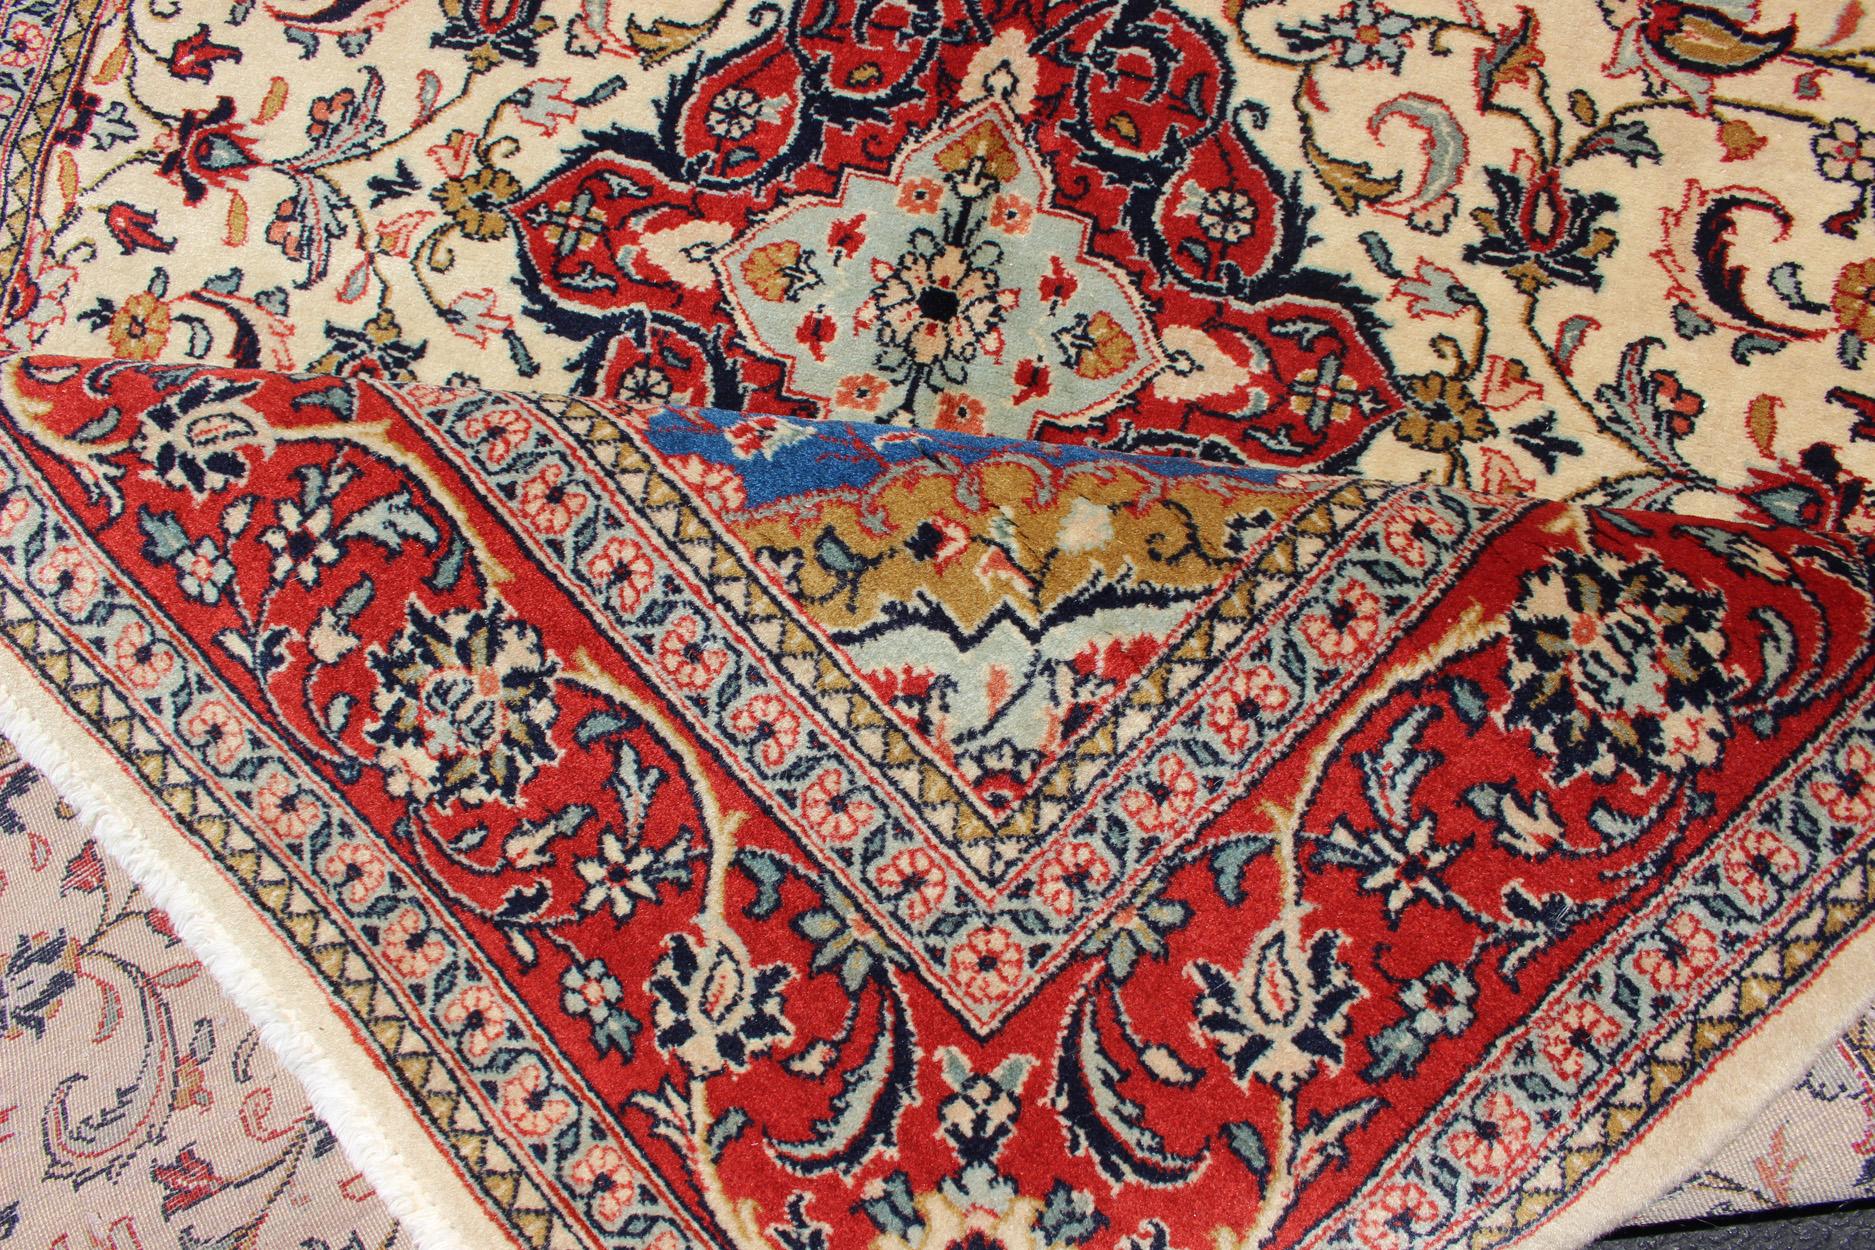 Vintage Persian Tabriz Rug with Floral Design in Cream, blue and Red 4